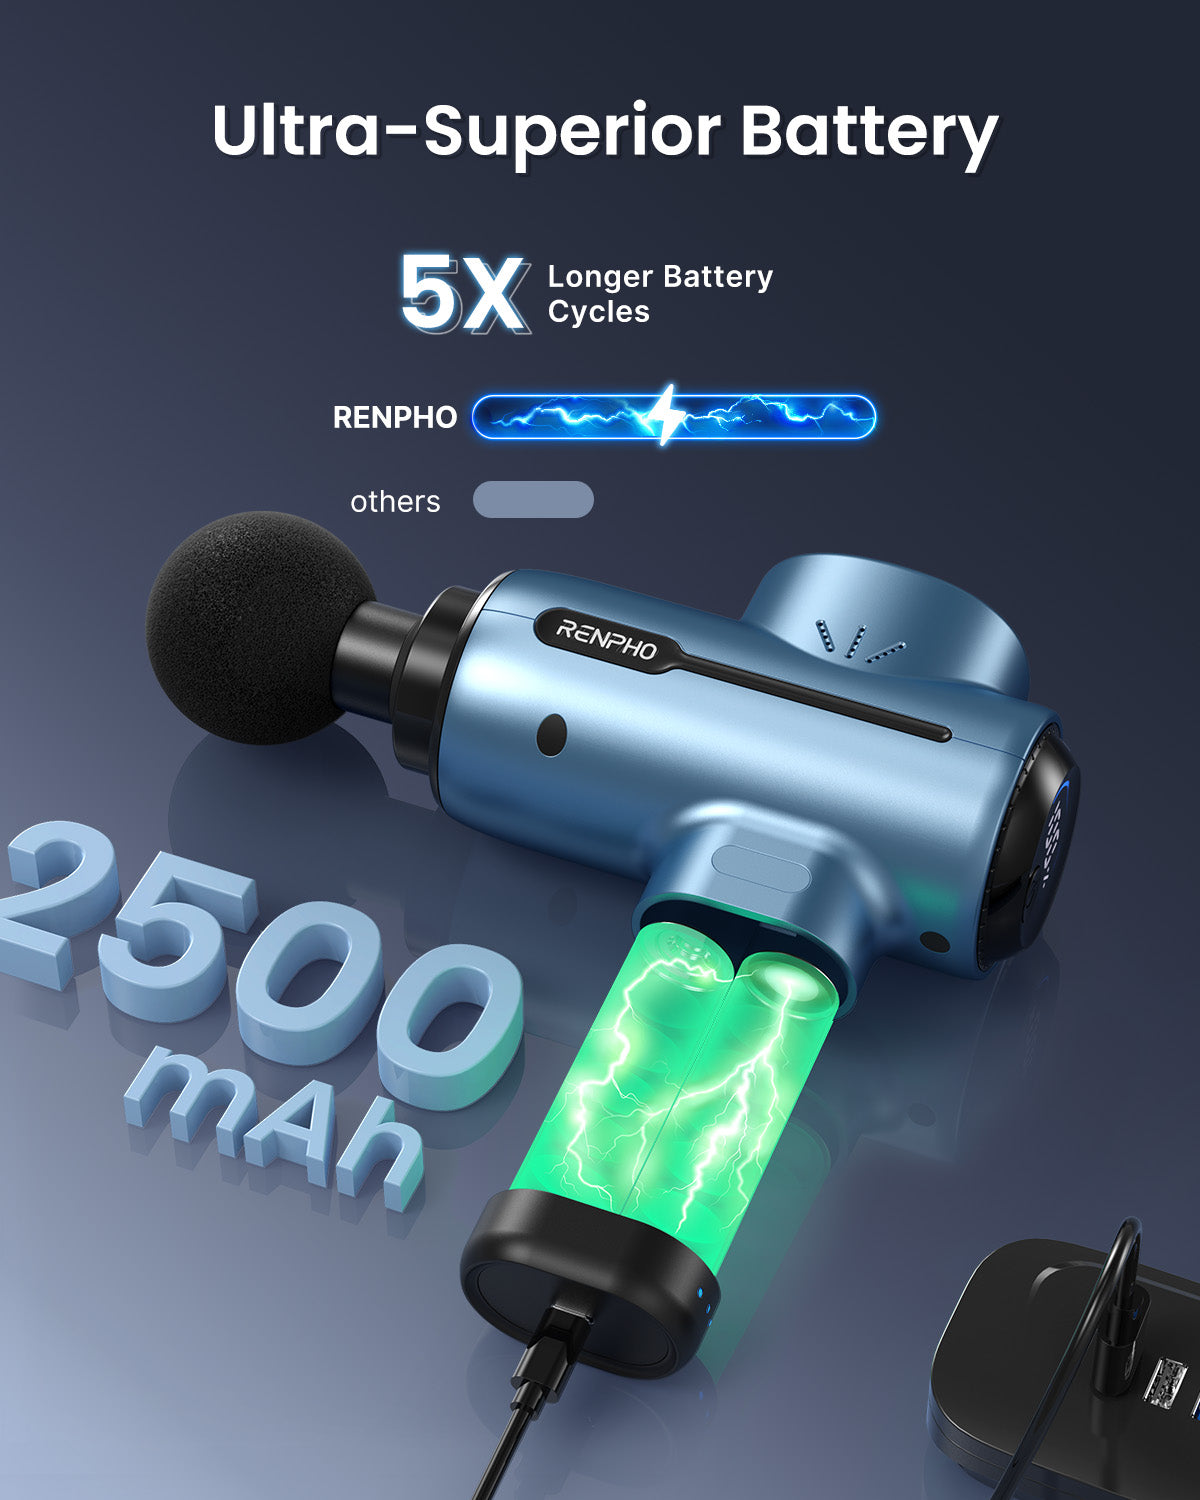 An advertisement for a Renpho EU massage gun, emphasizing its ultra-superior battery with "5x longer battery cycles" compared to others. Perfect for enhancing your fitness routine, the gun is shown